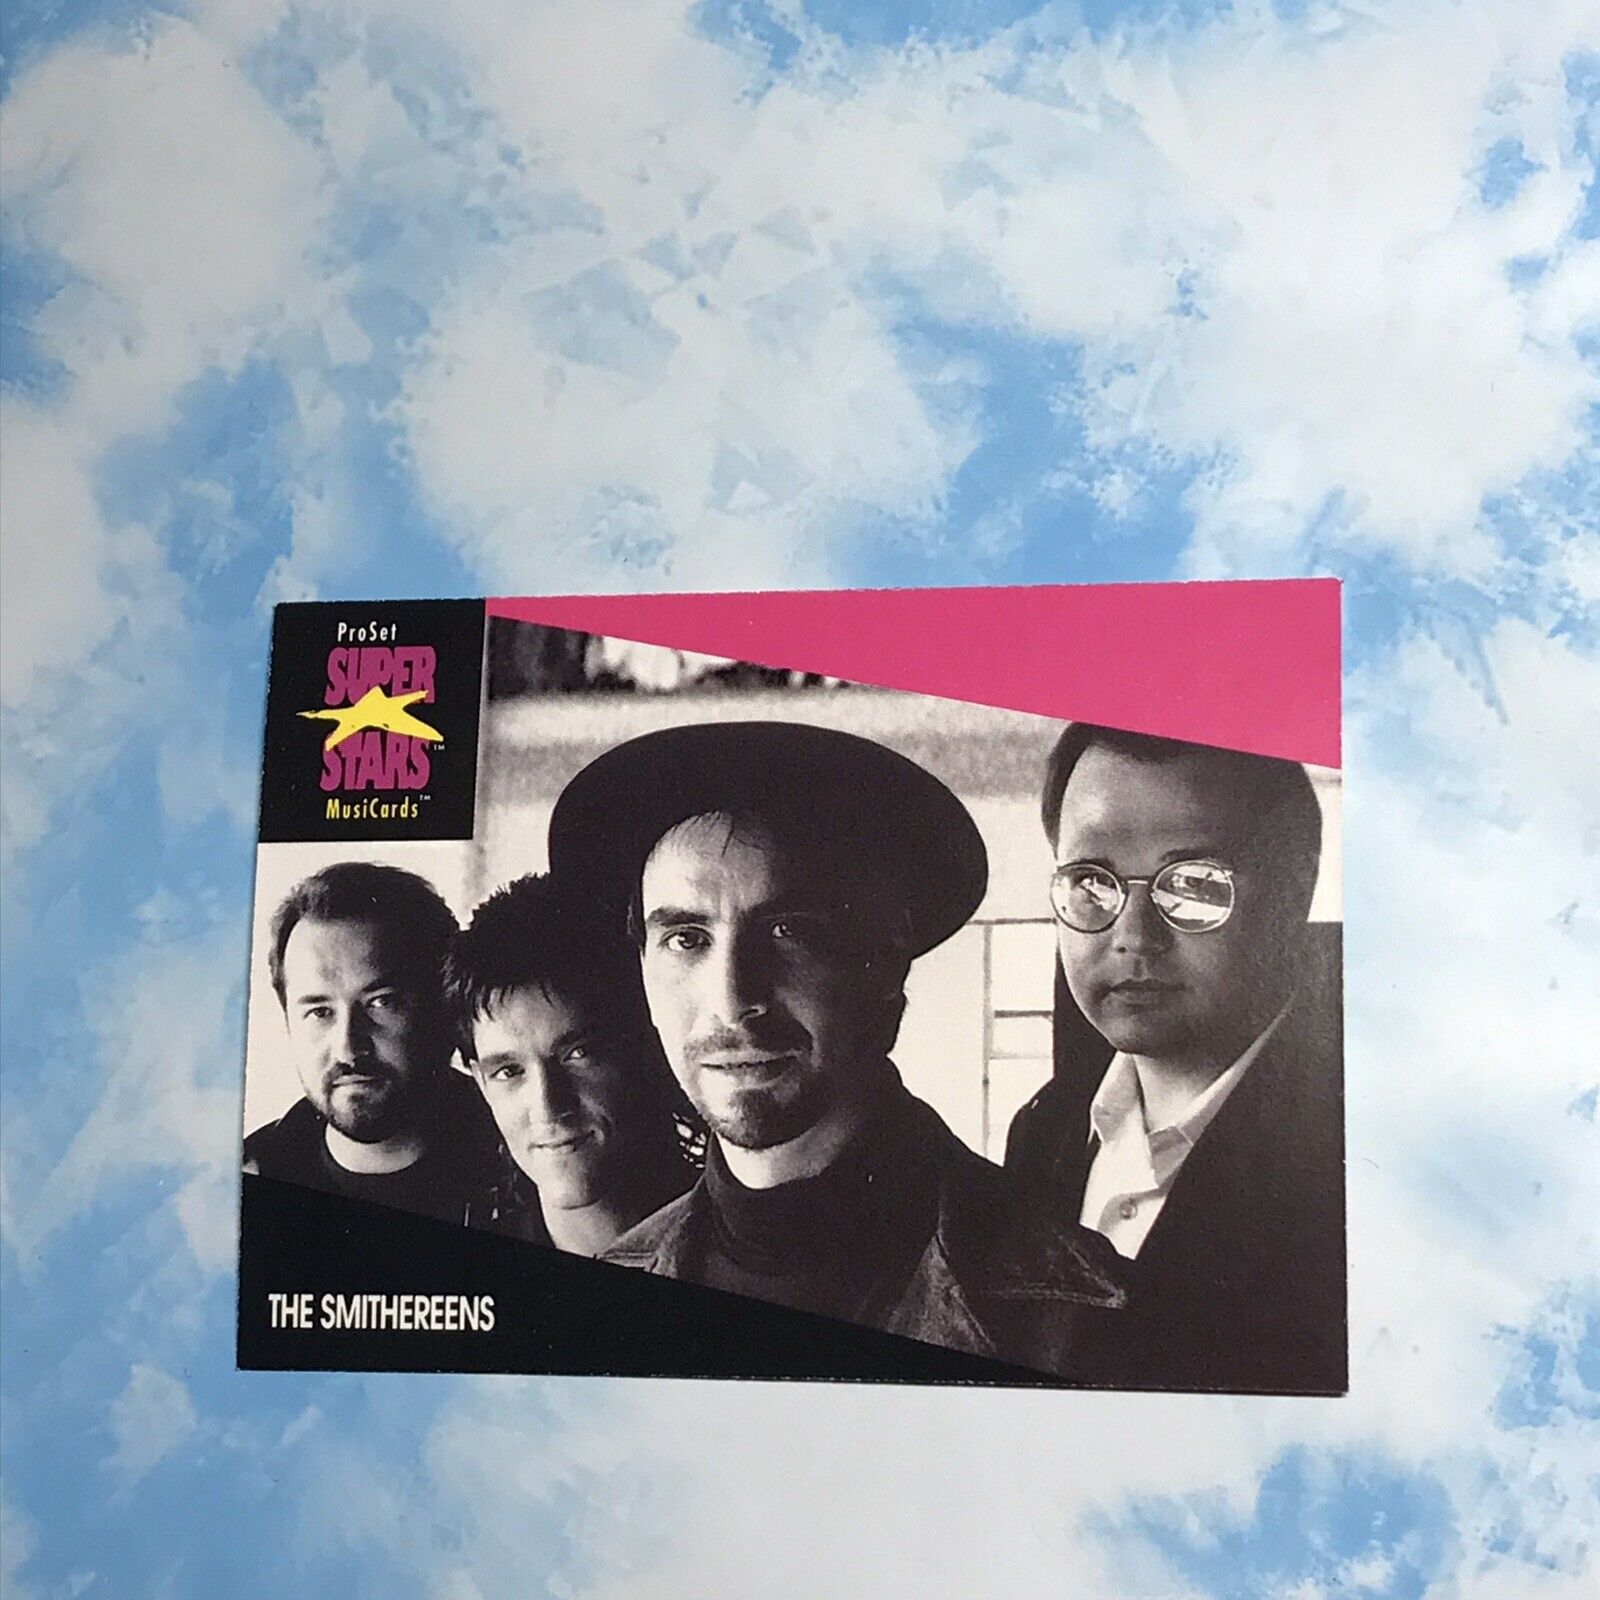 THE SMITHEREENS Music TRADING Card from 1991 - ProSet SuperStars MusiCards # 237